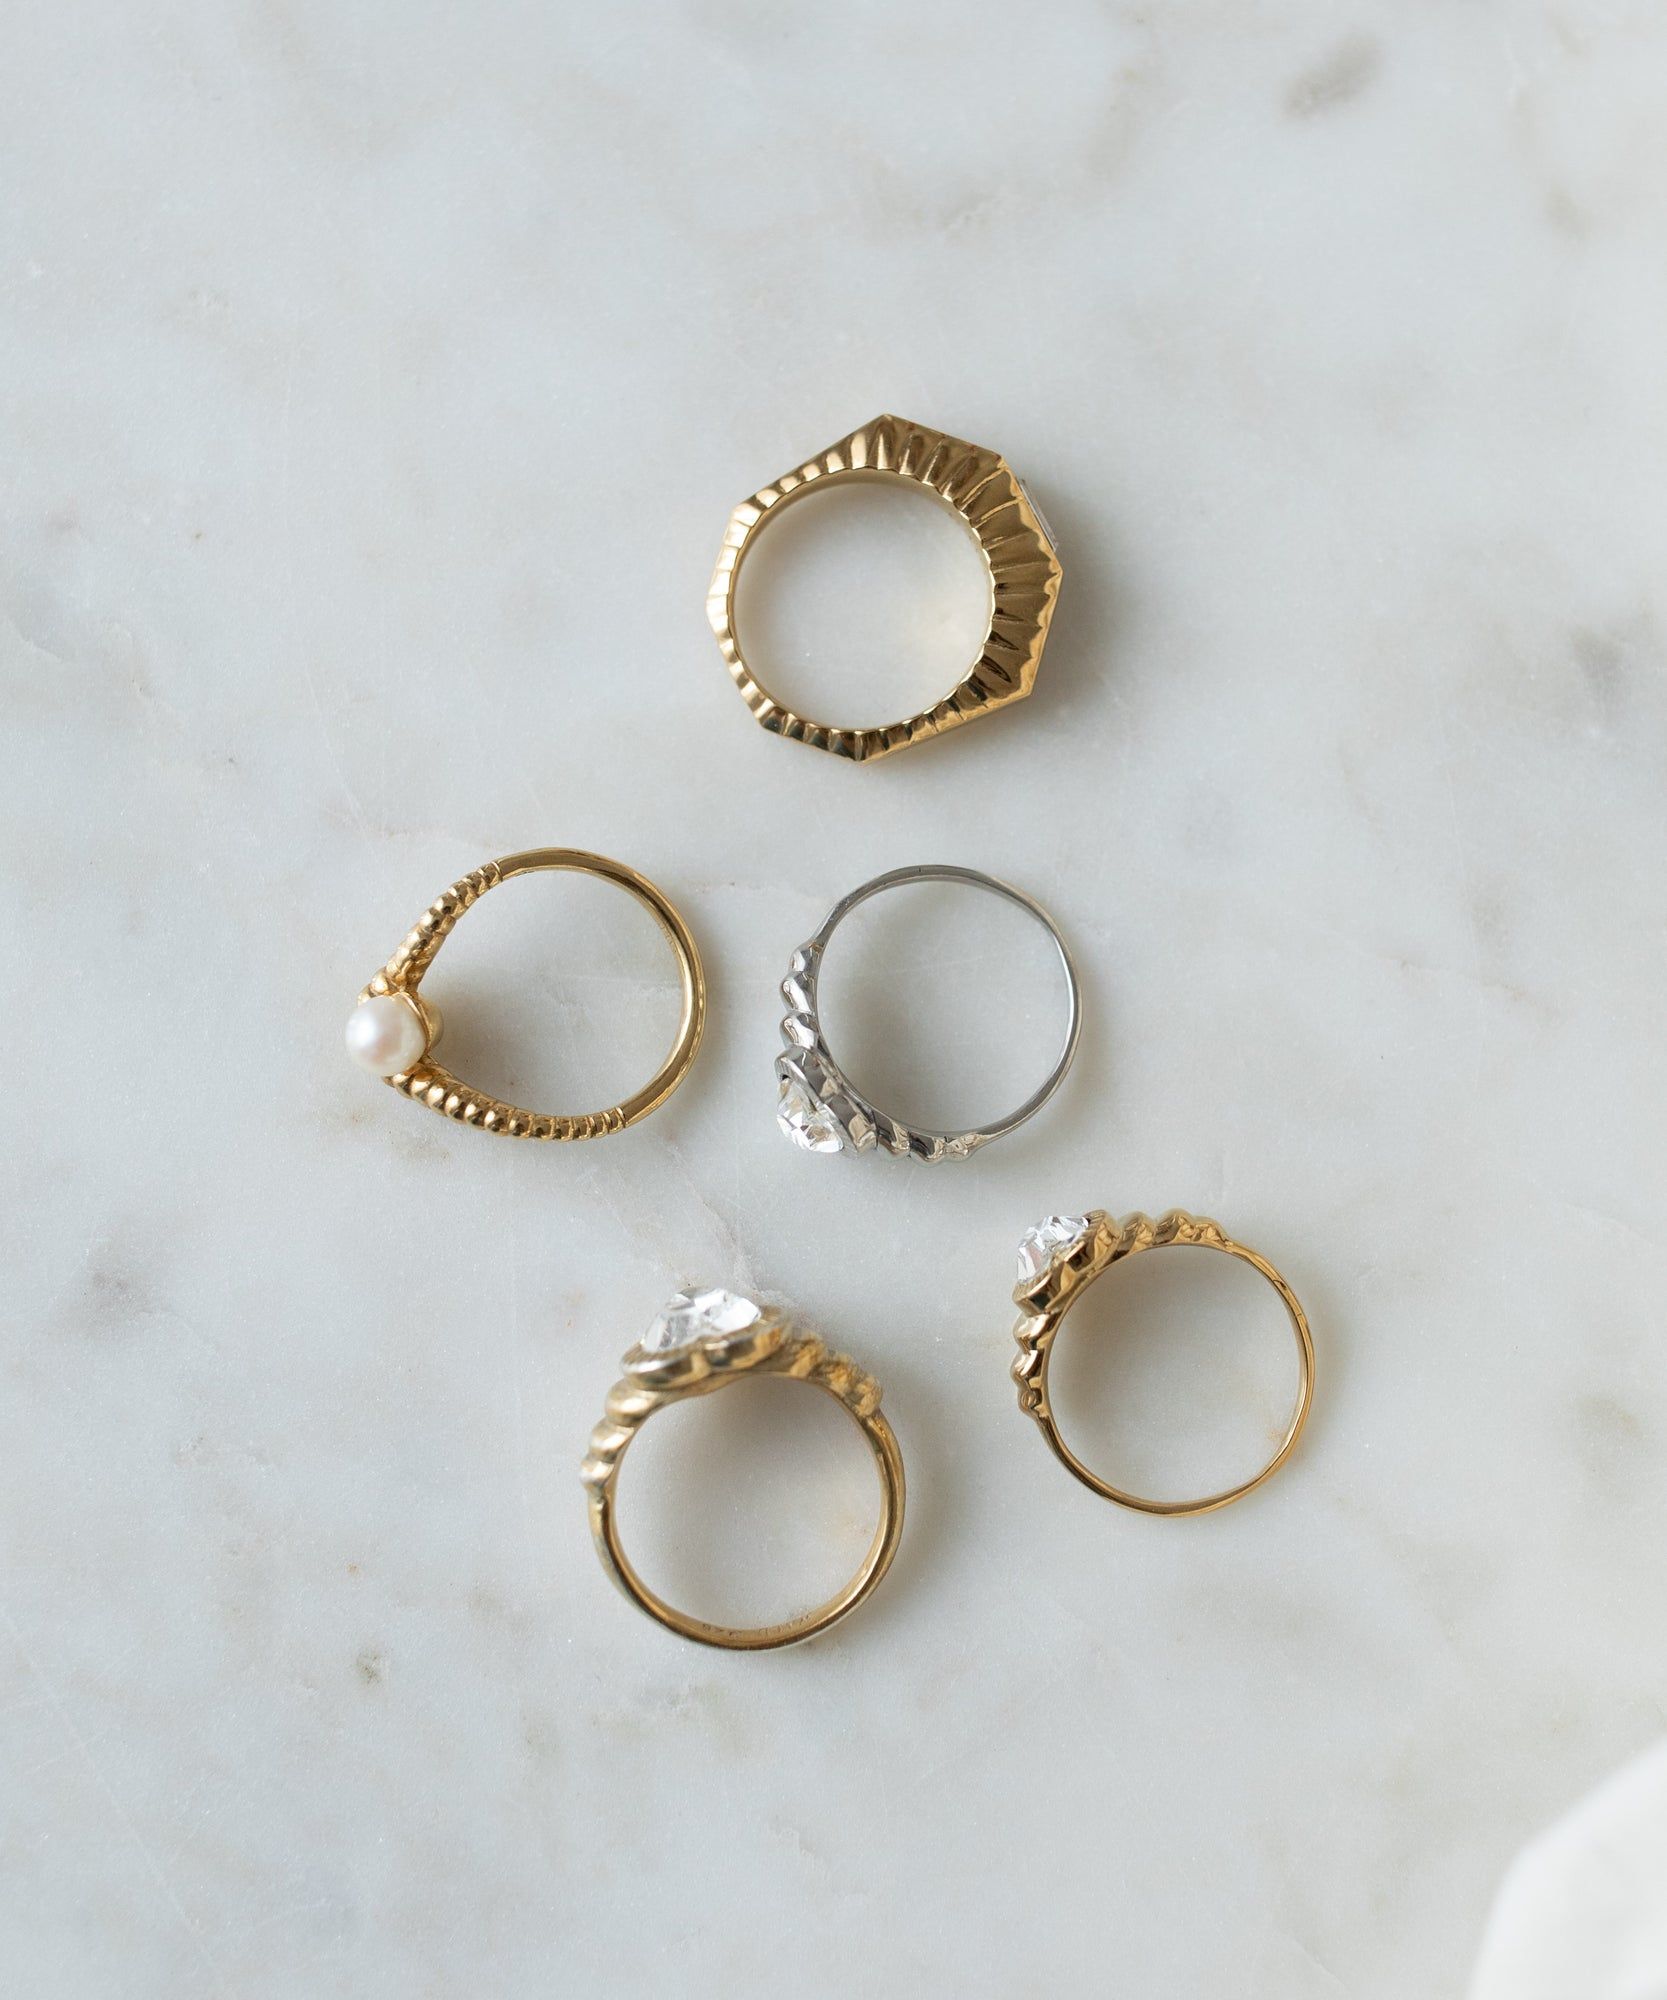 Six assorted Shining Star Gold Rings, including pearl and Swarovski stone designs, arranged on a marble surface by WALD Berlin.